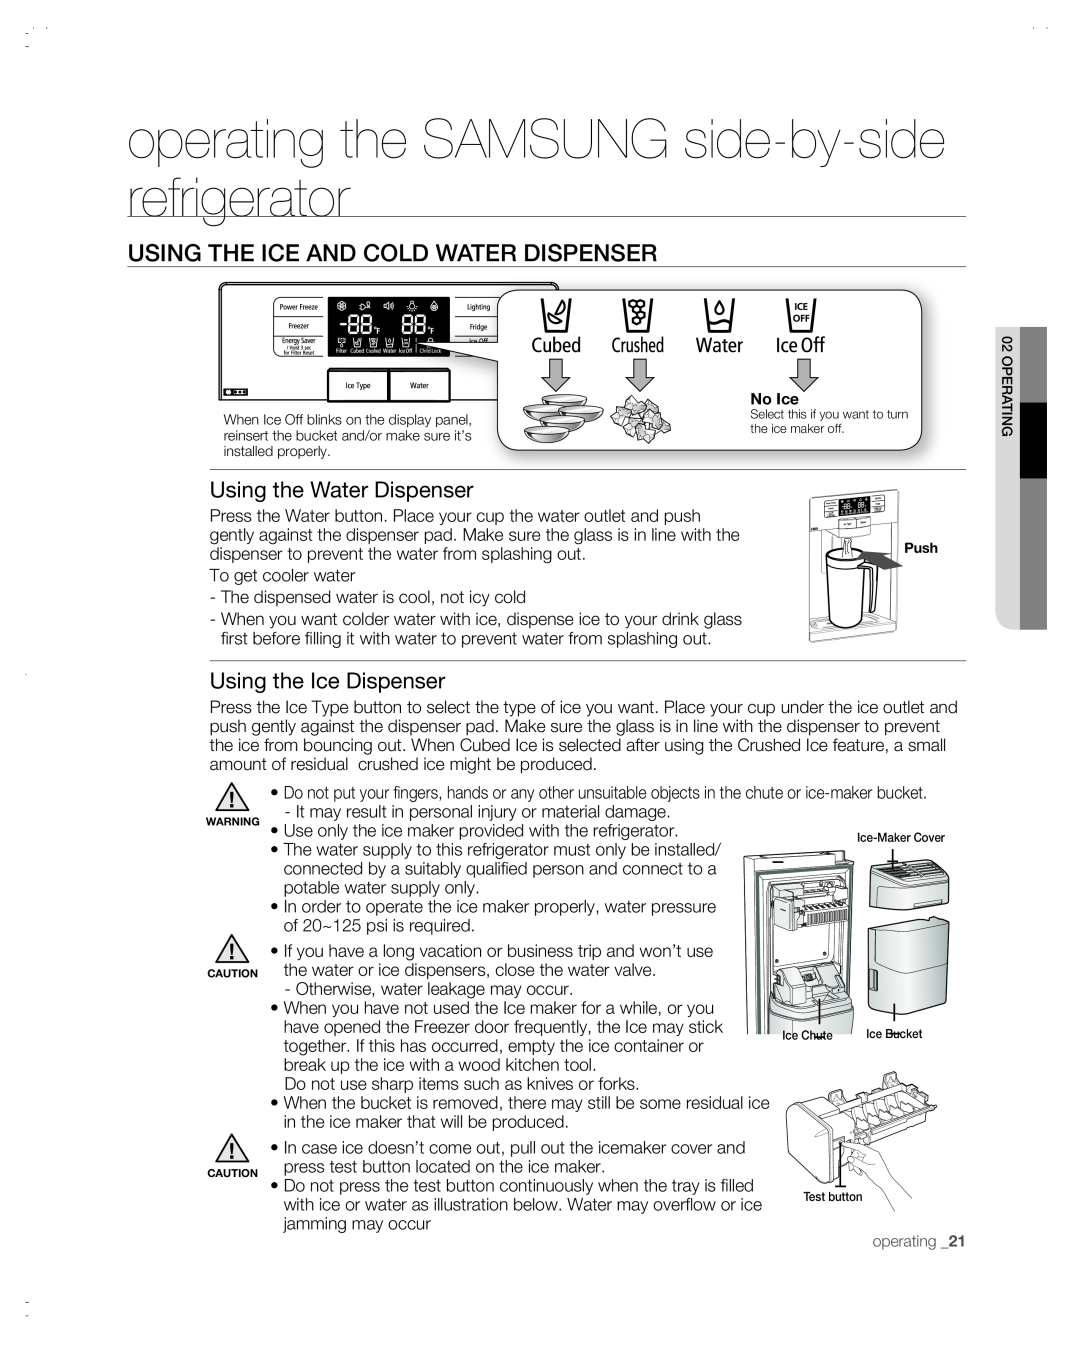 Samsung RSG257AABP user manual Using the ice and cold water dispenser, Using the Water Dispenser, Using the Ice Dispenser 